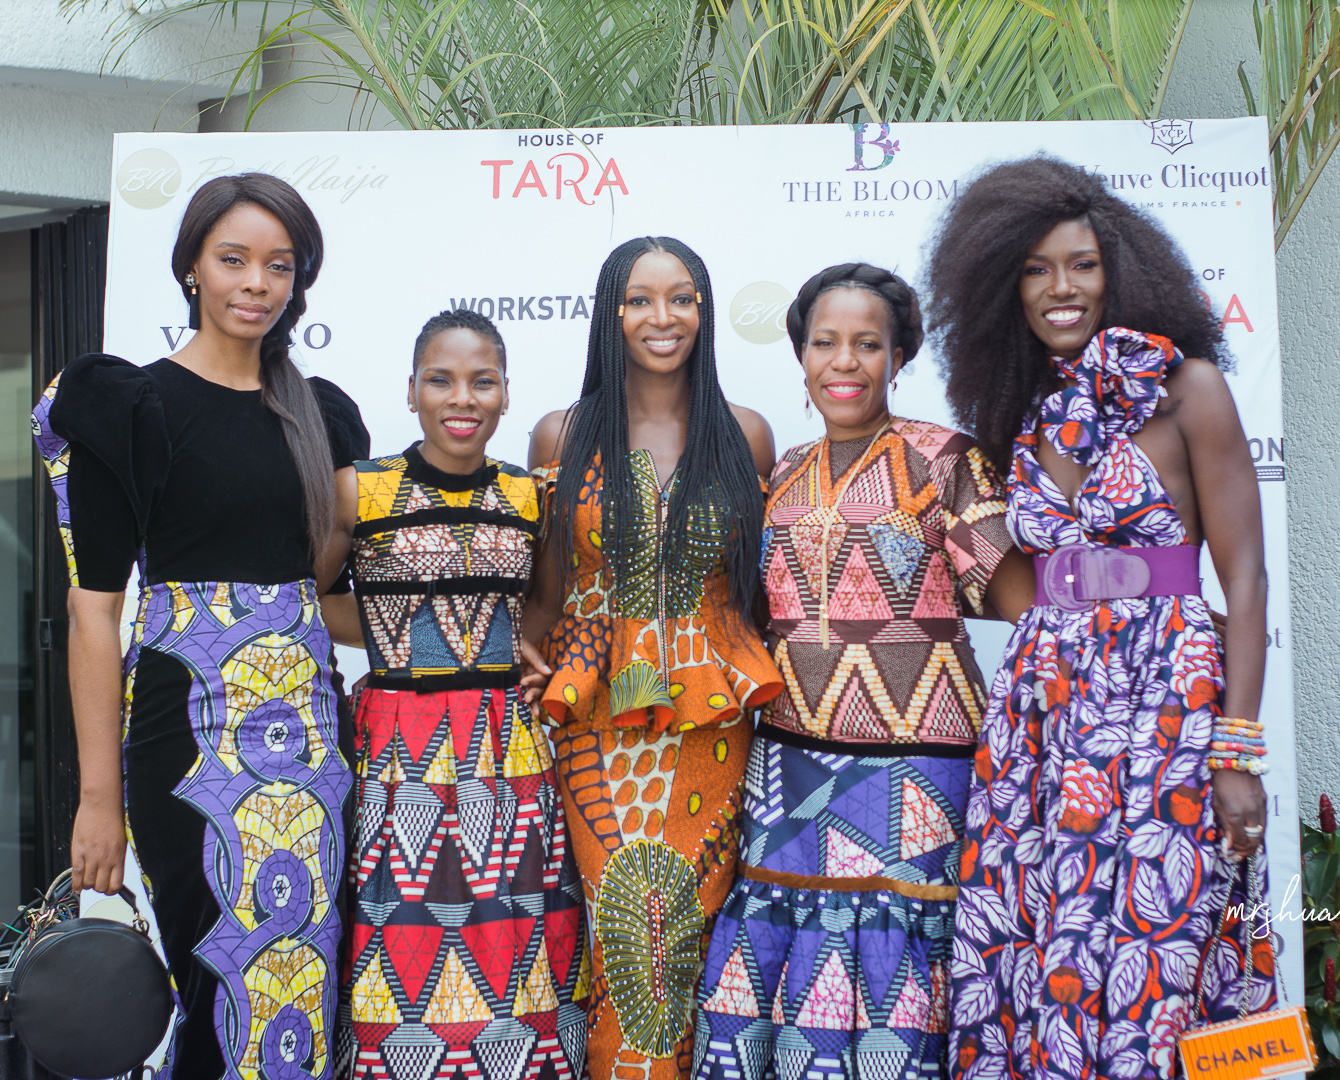 Inside The Bloom Africa Launch : “Passion, Purpose and Power” Tea with Luvvie Ajayi, Funa Maduka, Justina Omokhua and Bozoma Saint-John